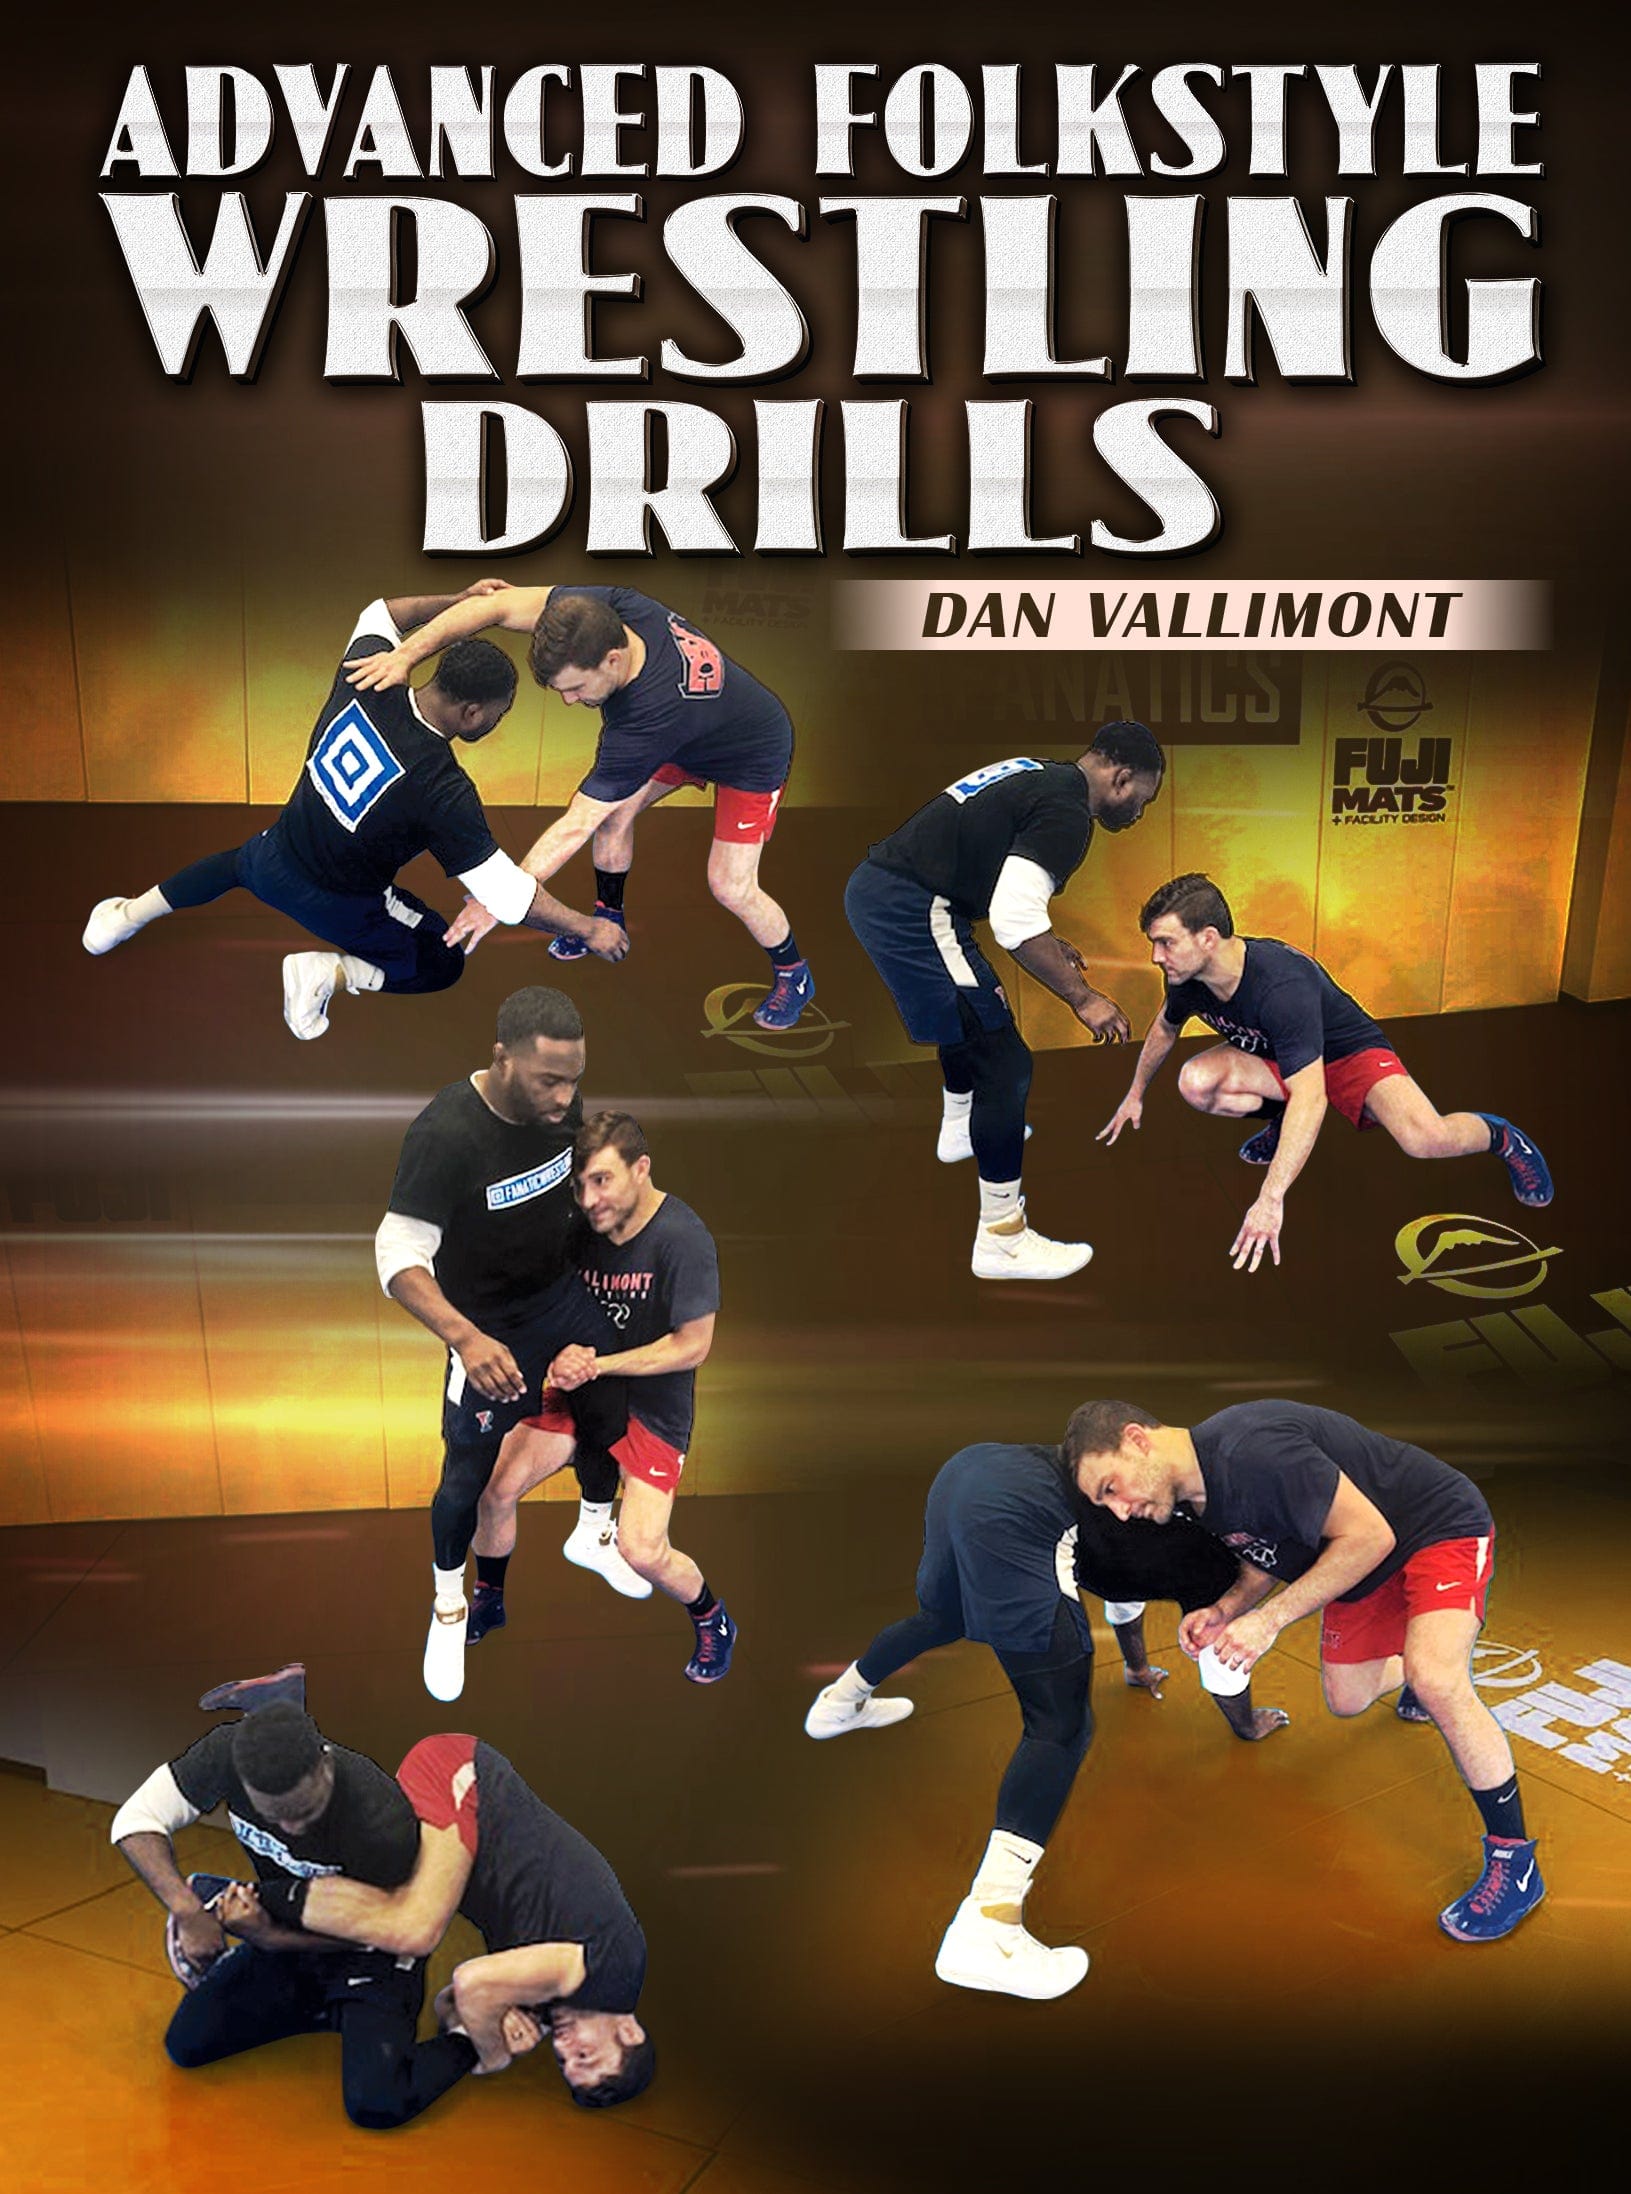 Advanced Folkstyle Wrestling Drills by Dan Vallimont - Fanatic Wrestling